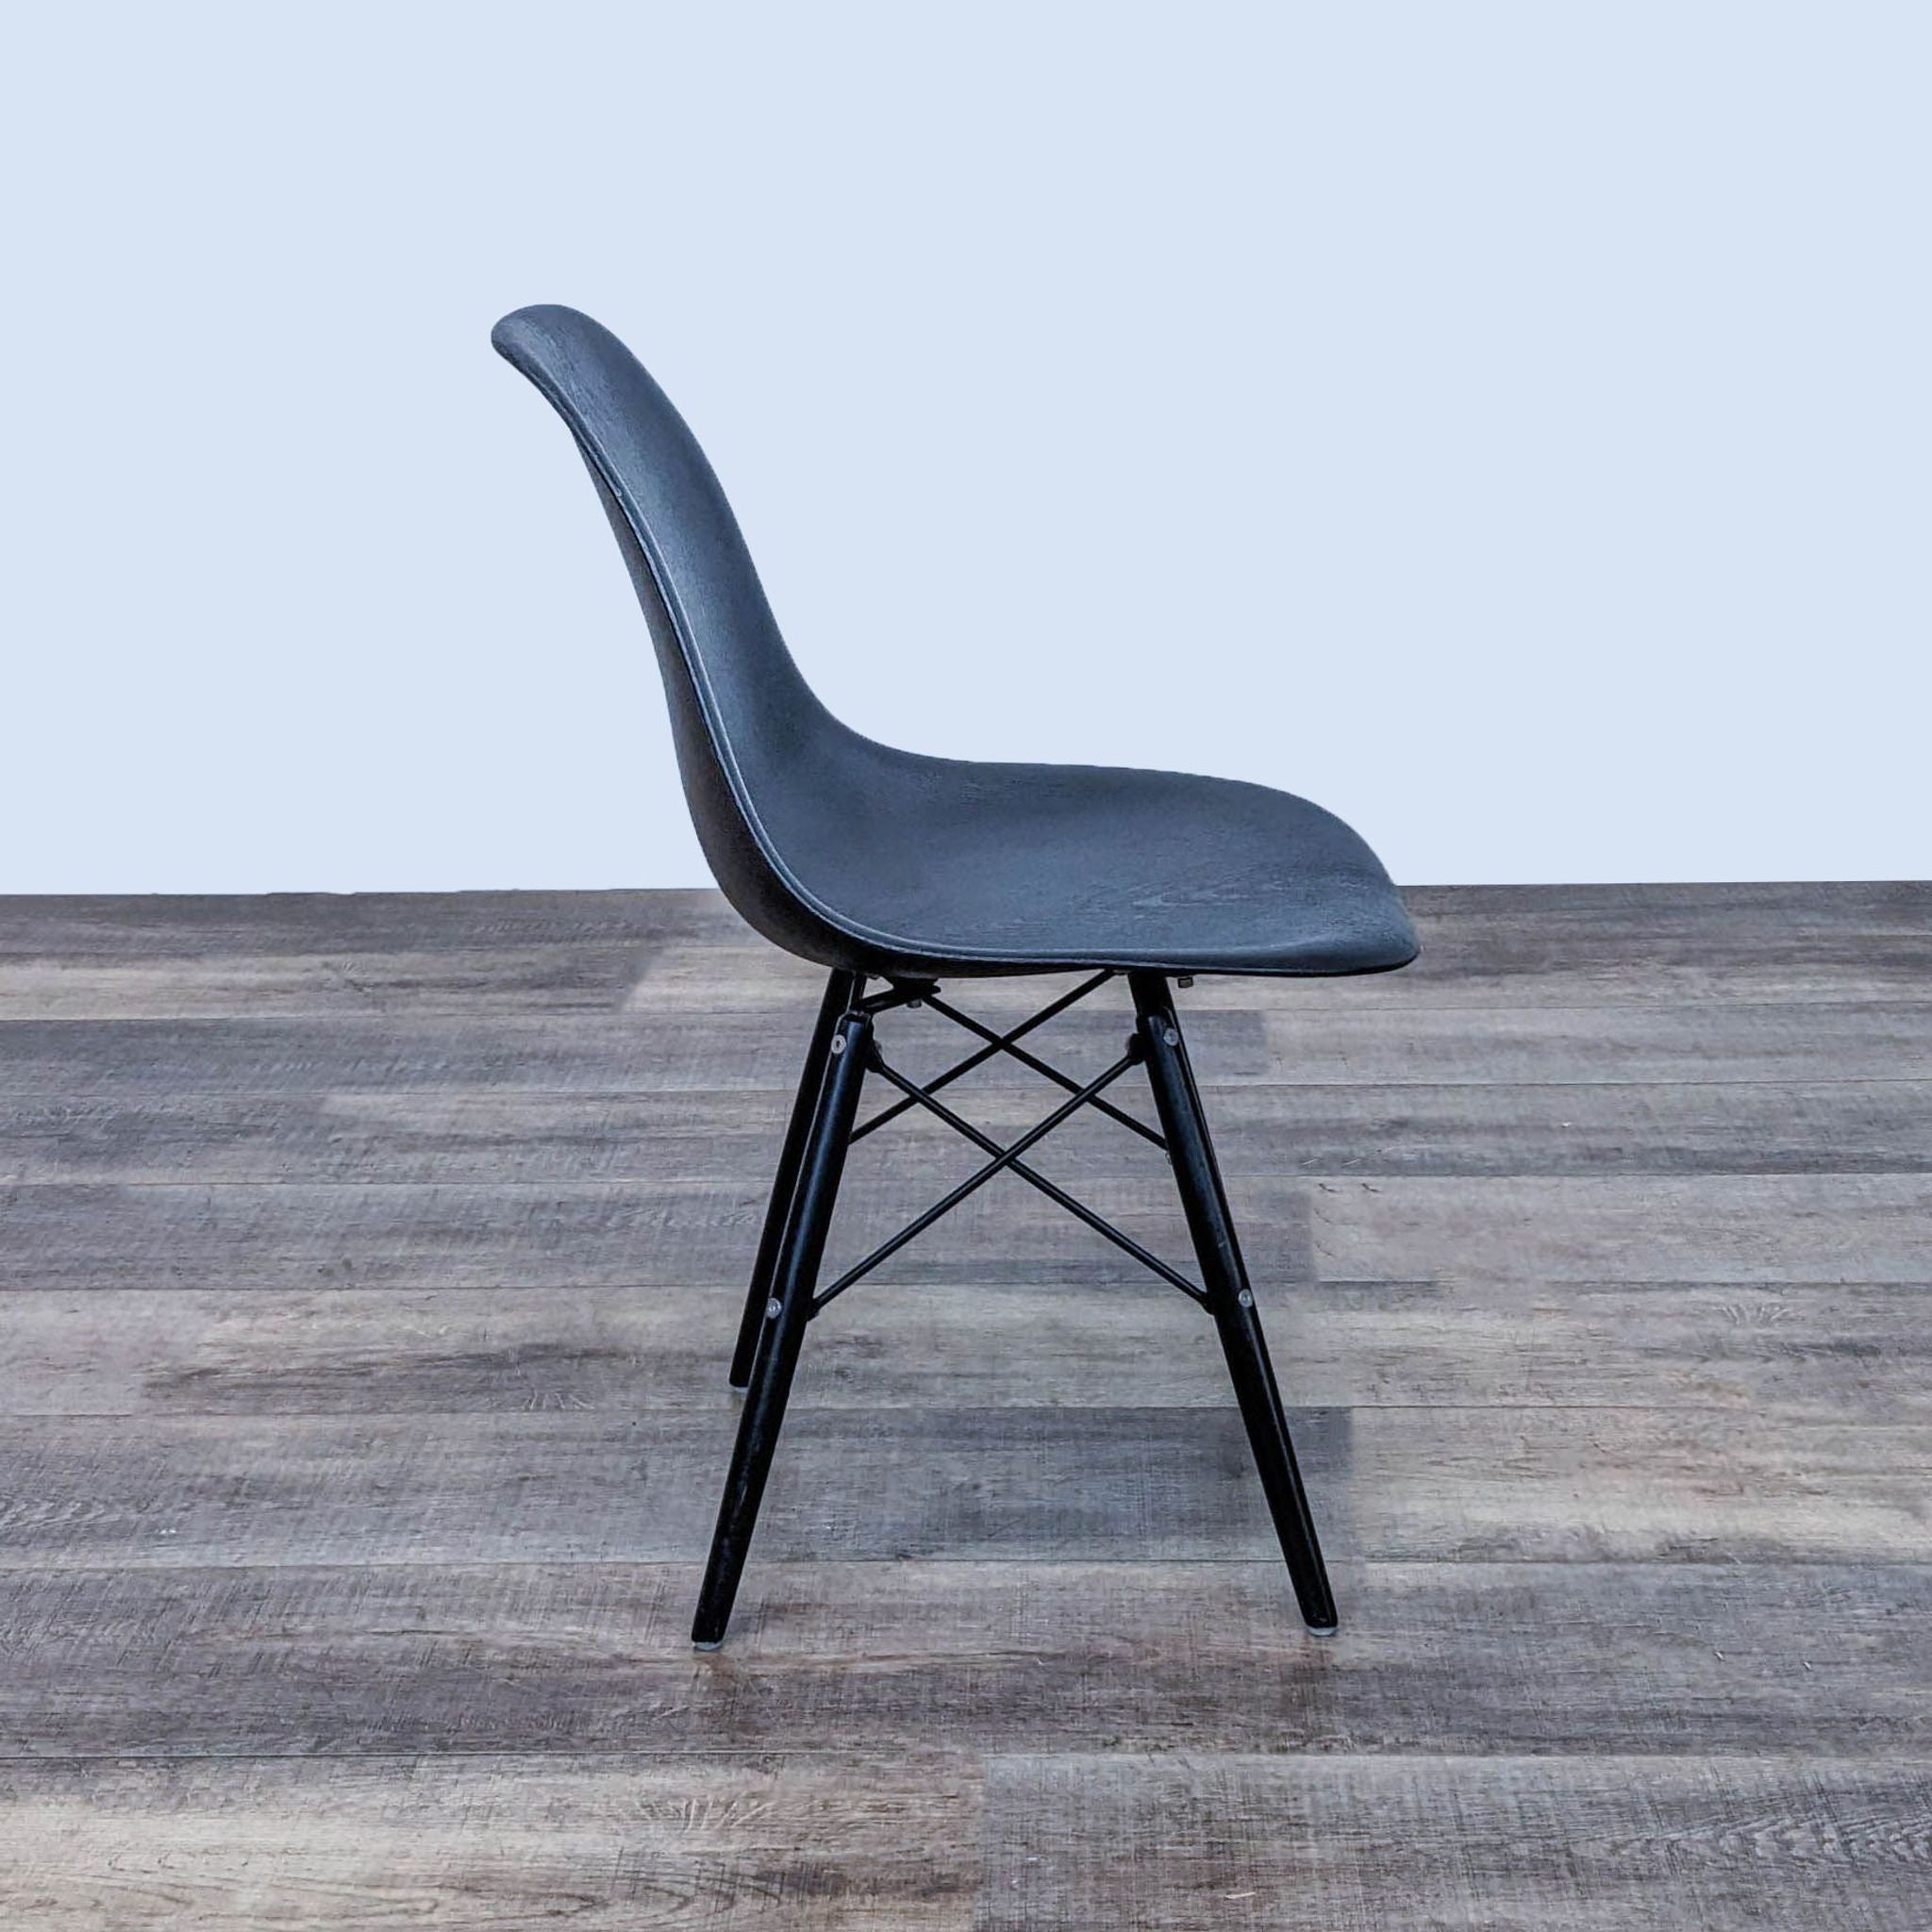 Reperch modern dining chair with black moulded seat and Eiffel metal base, shown from a side angle.